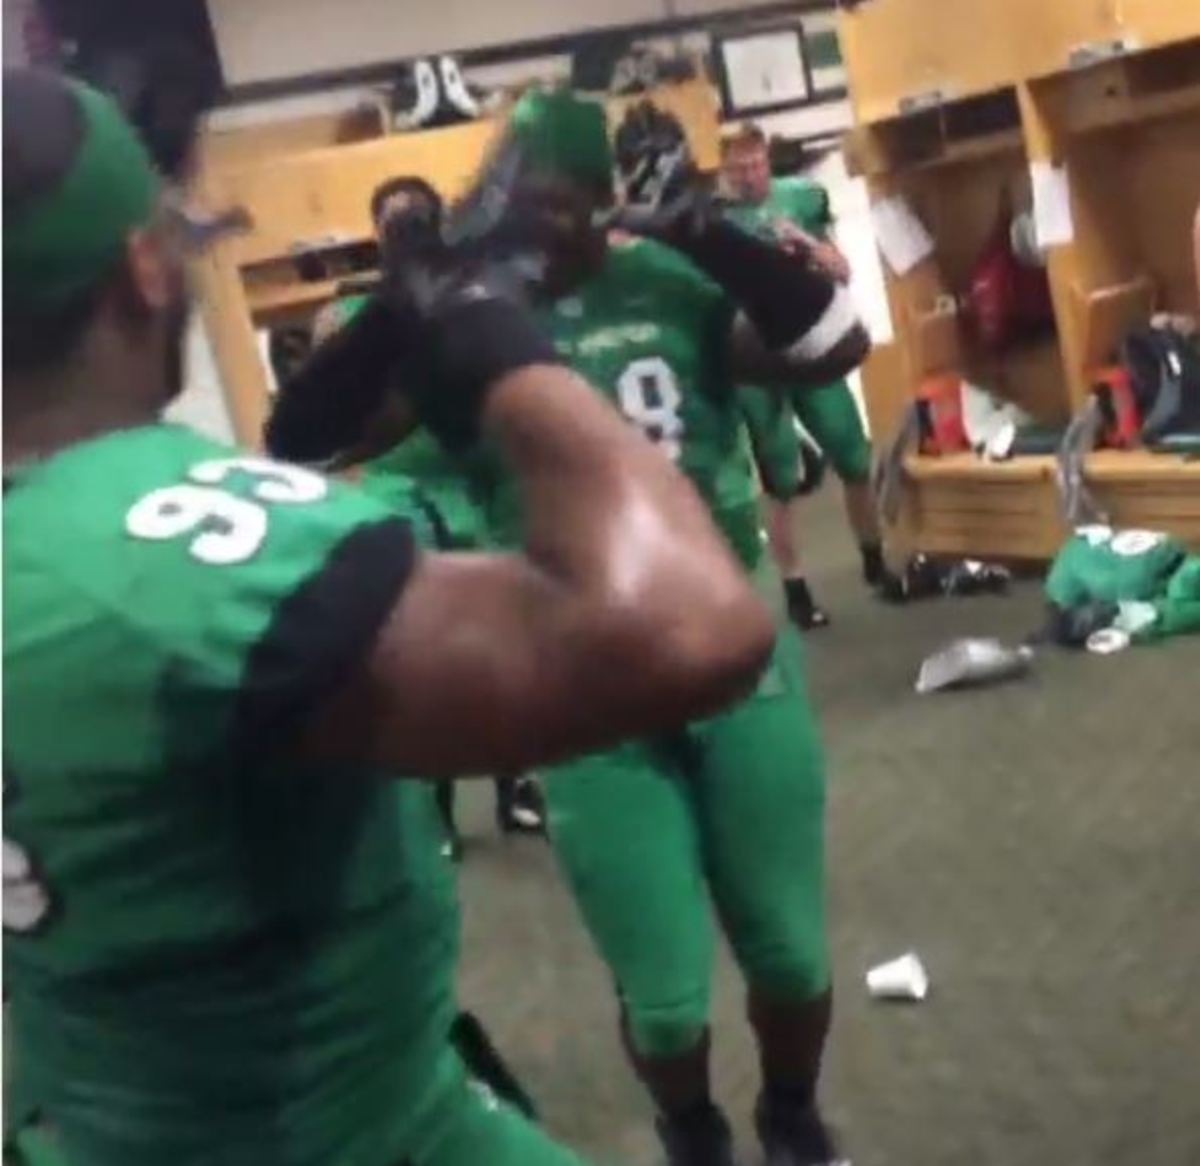 Marshall players fired up in the locker room after win over Purdue.